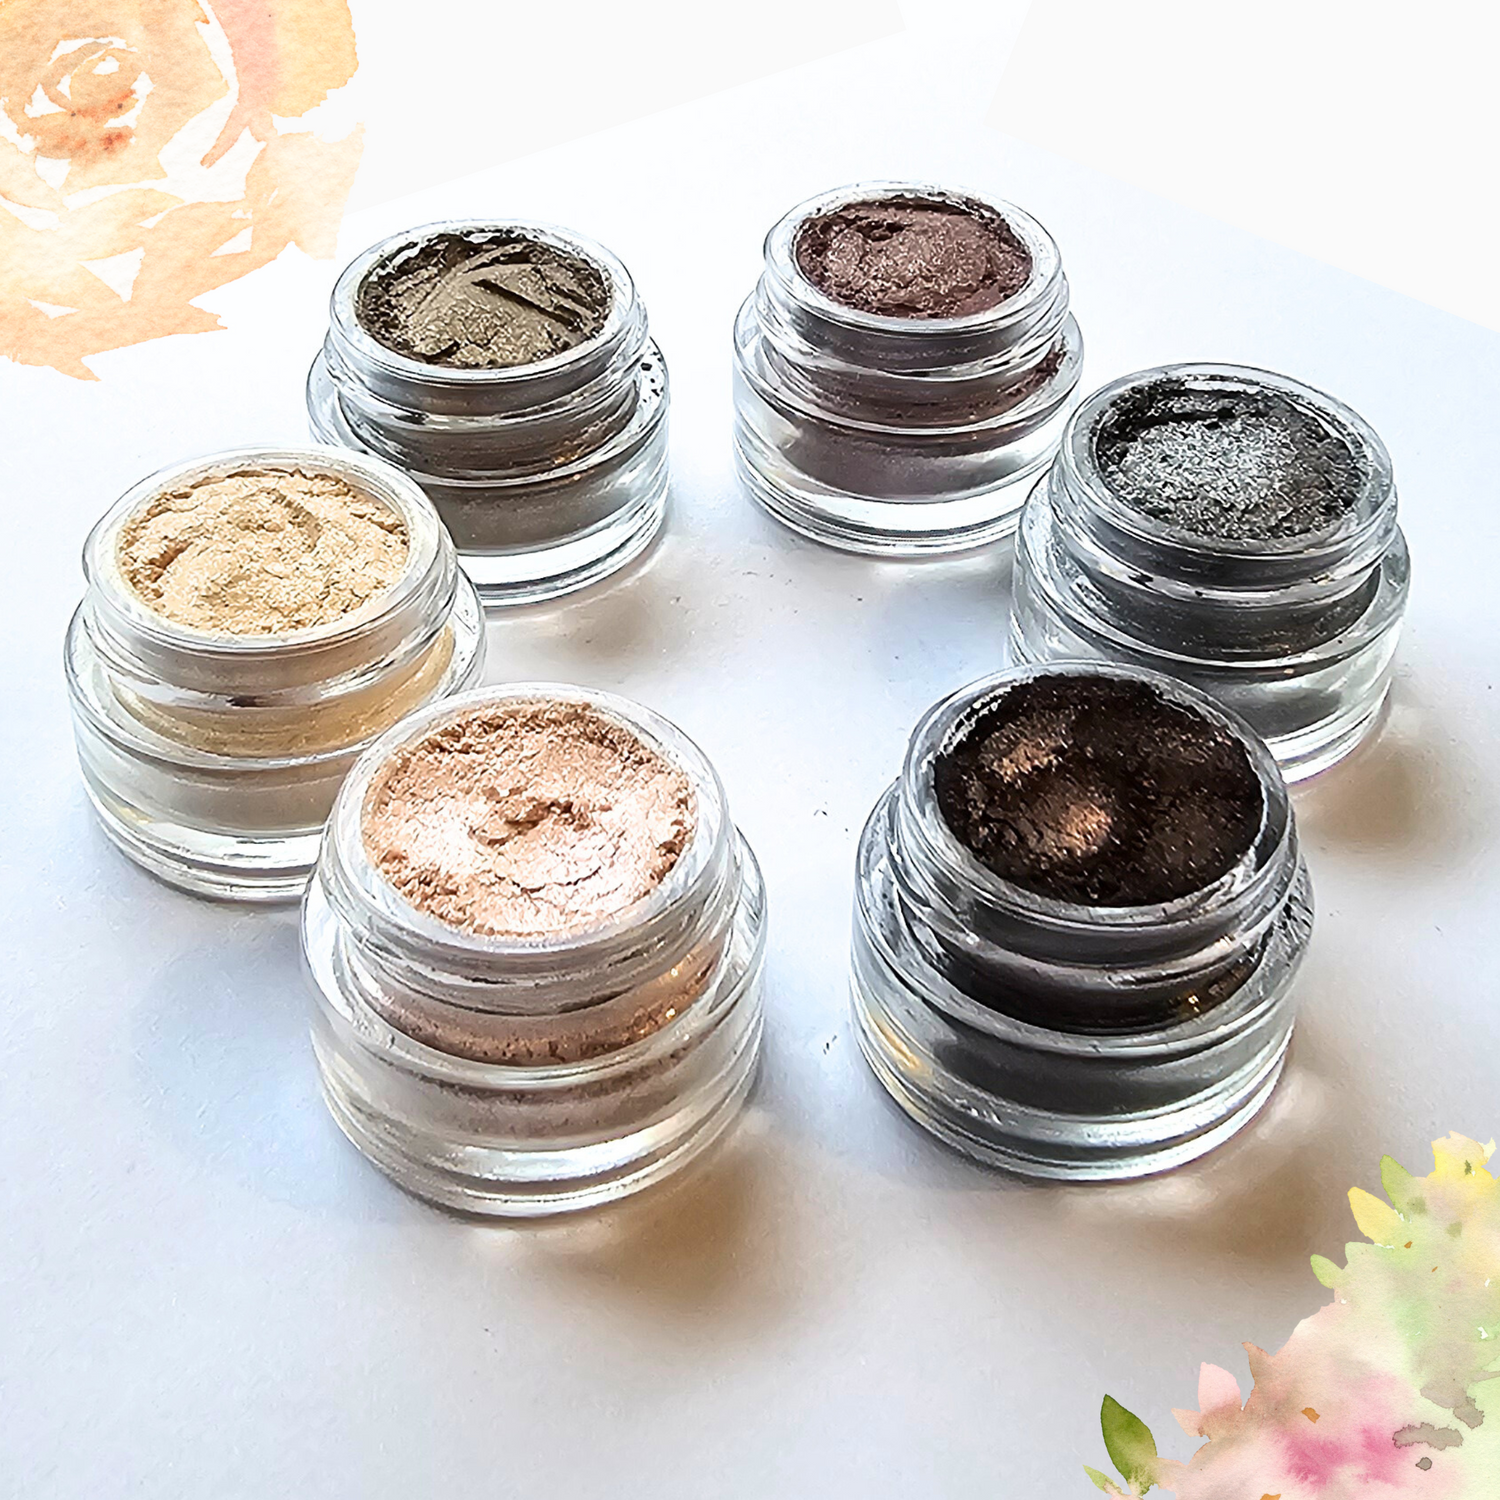 Flower + Mineral Cosmetics with Skin Loving Active Ingredients